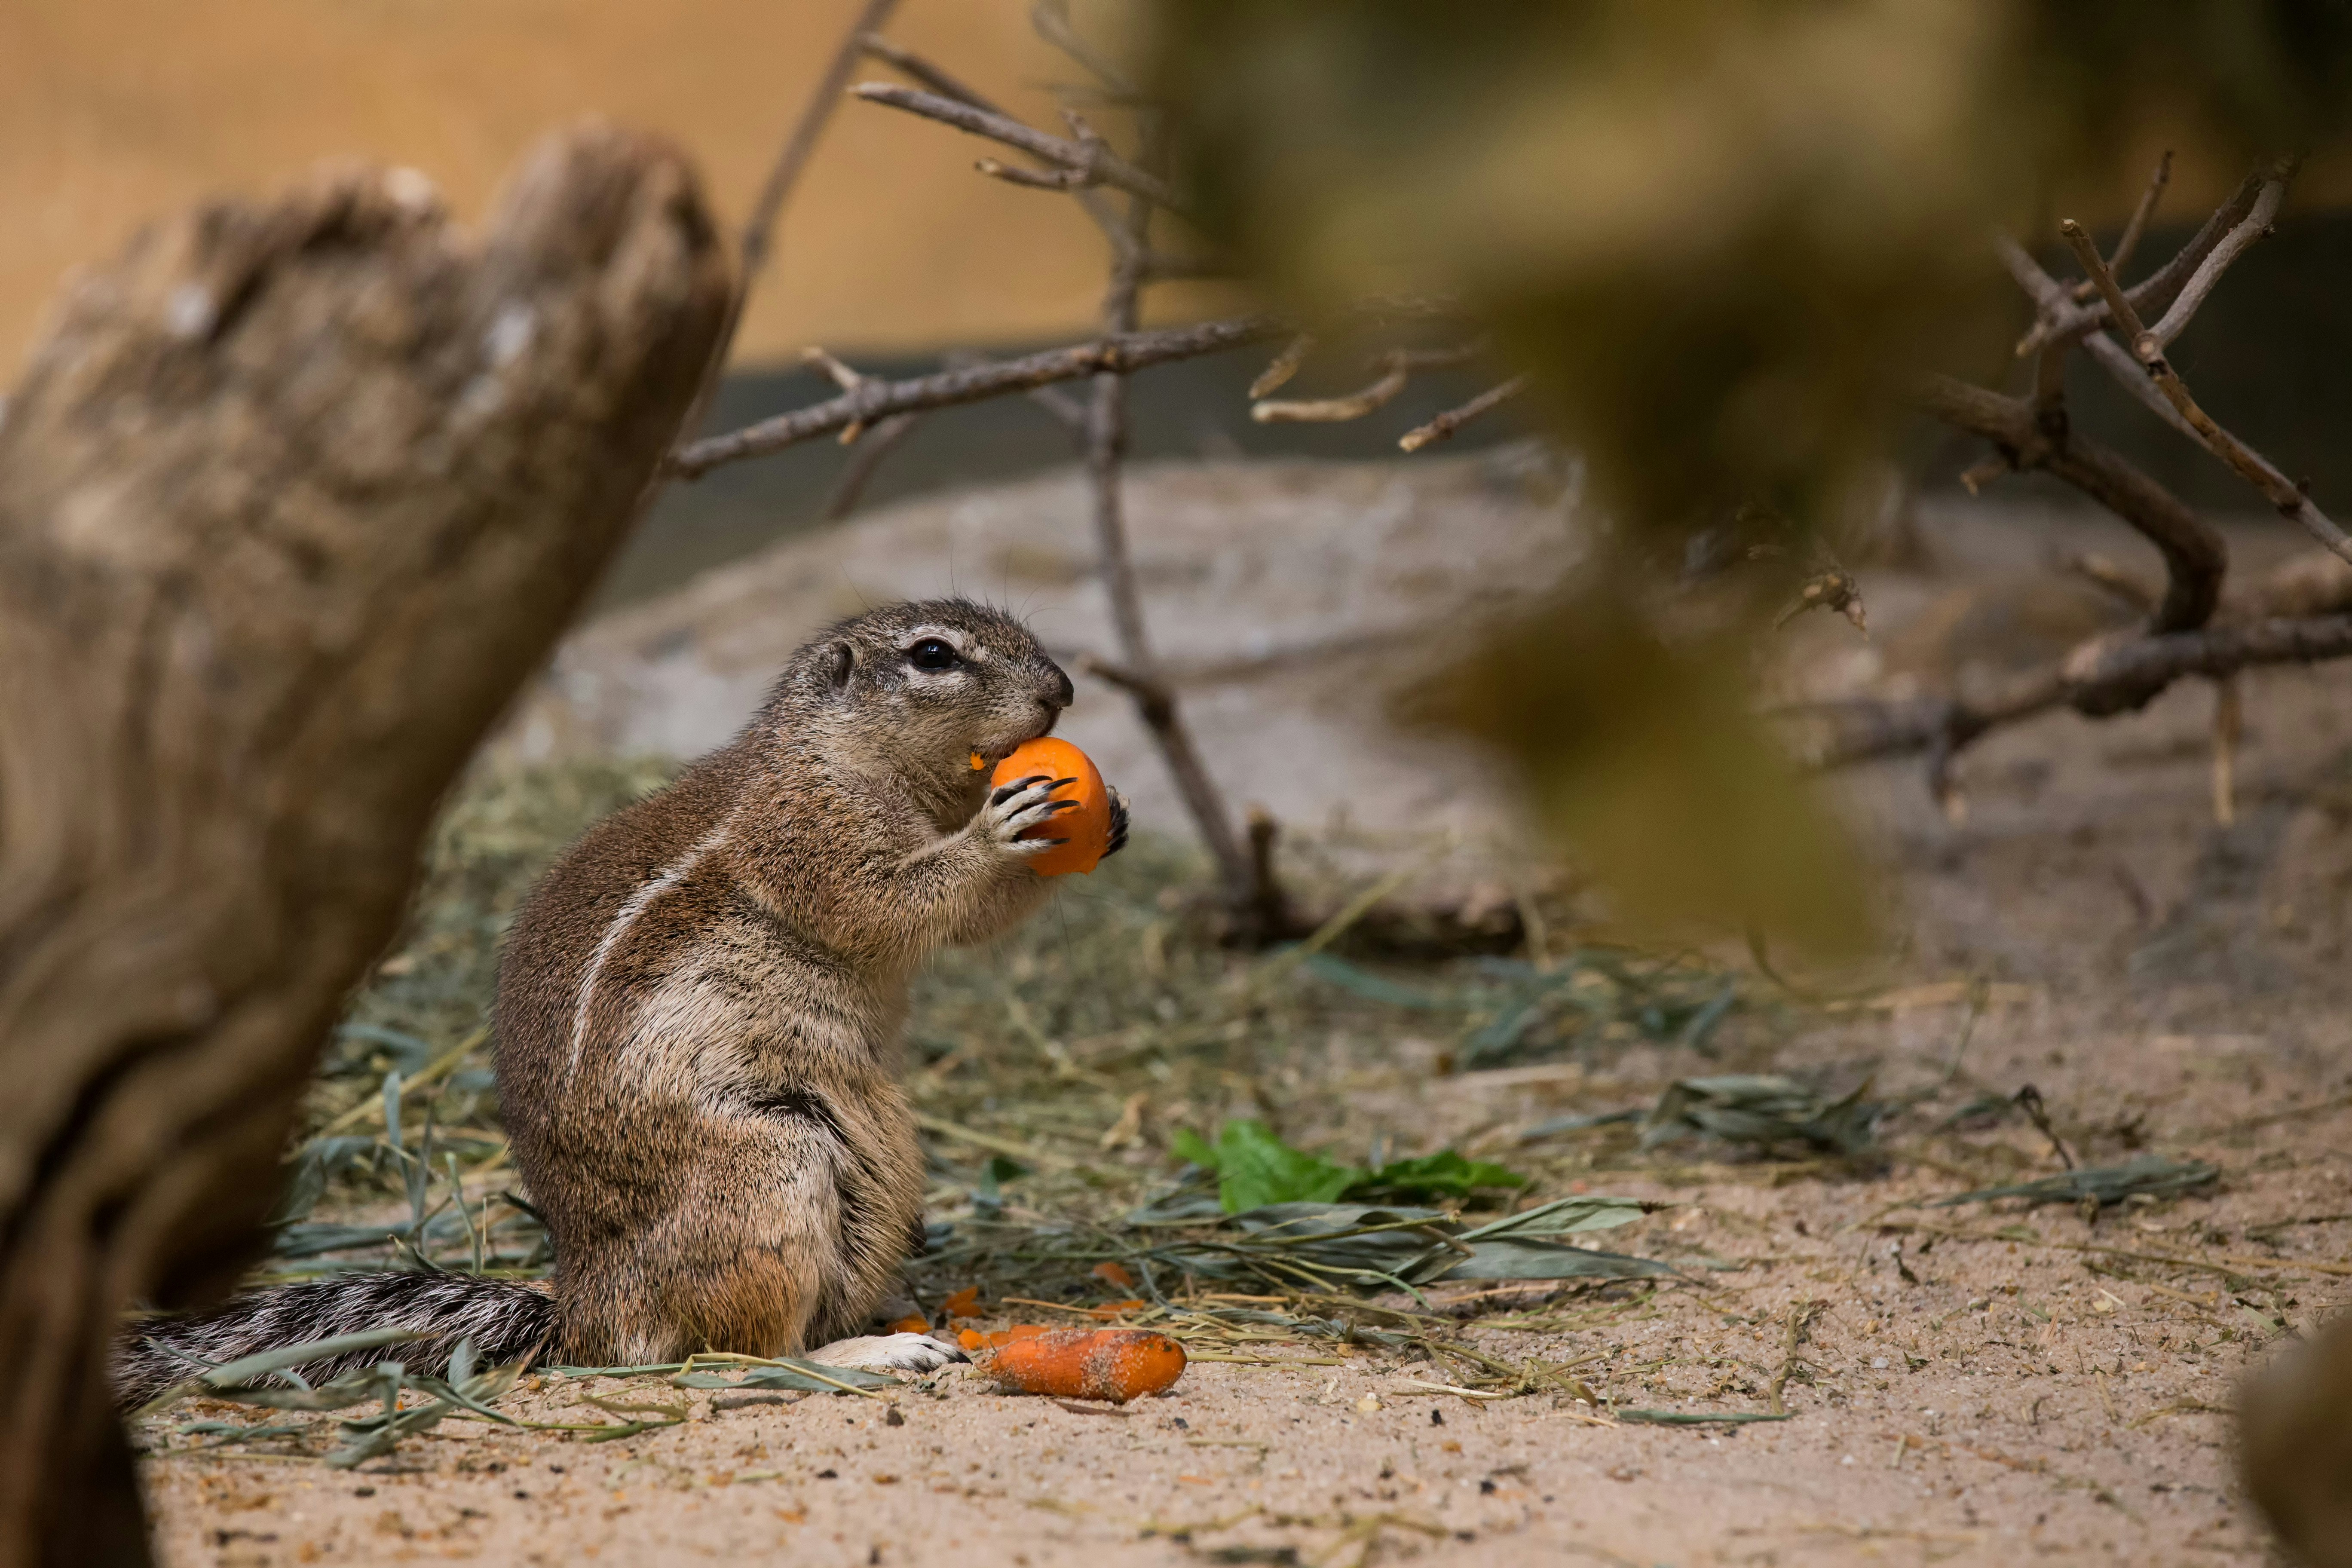 one cutes sitting chipmunk eating a carrot